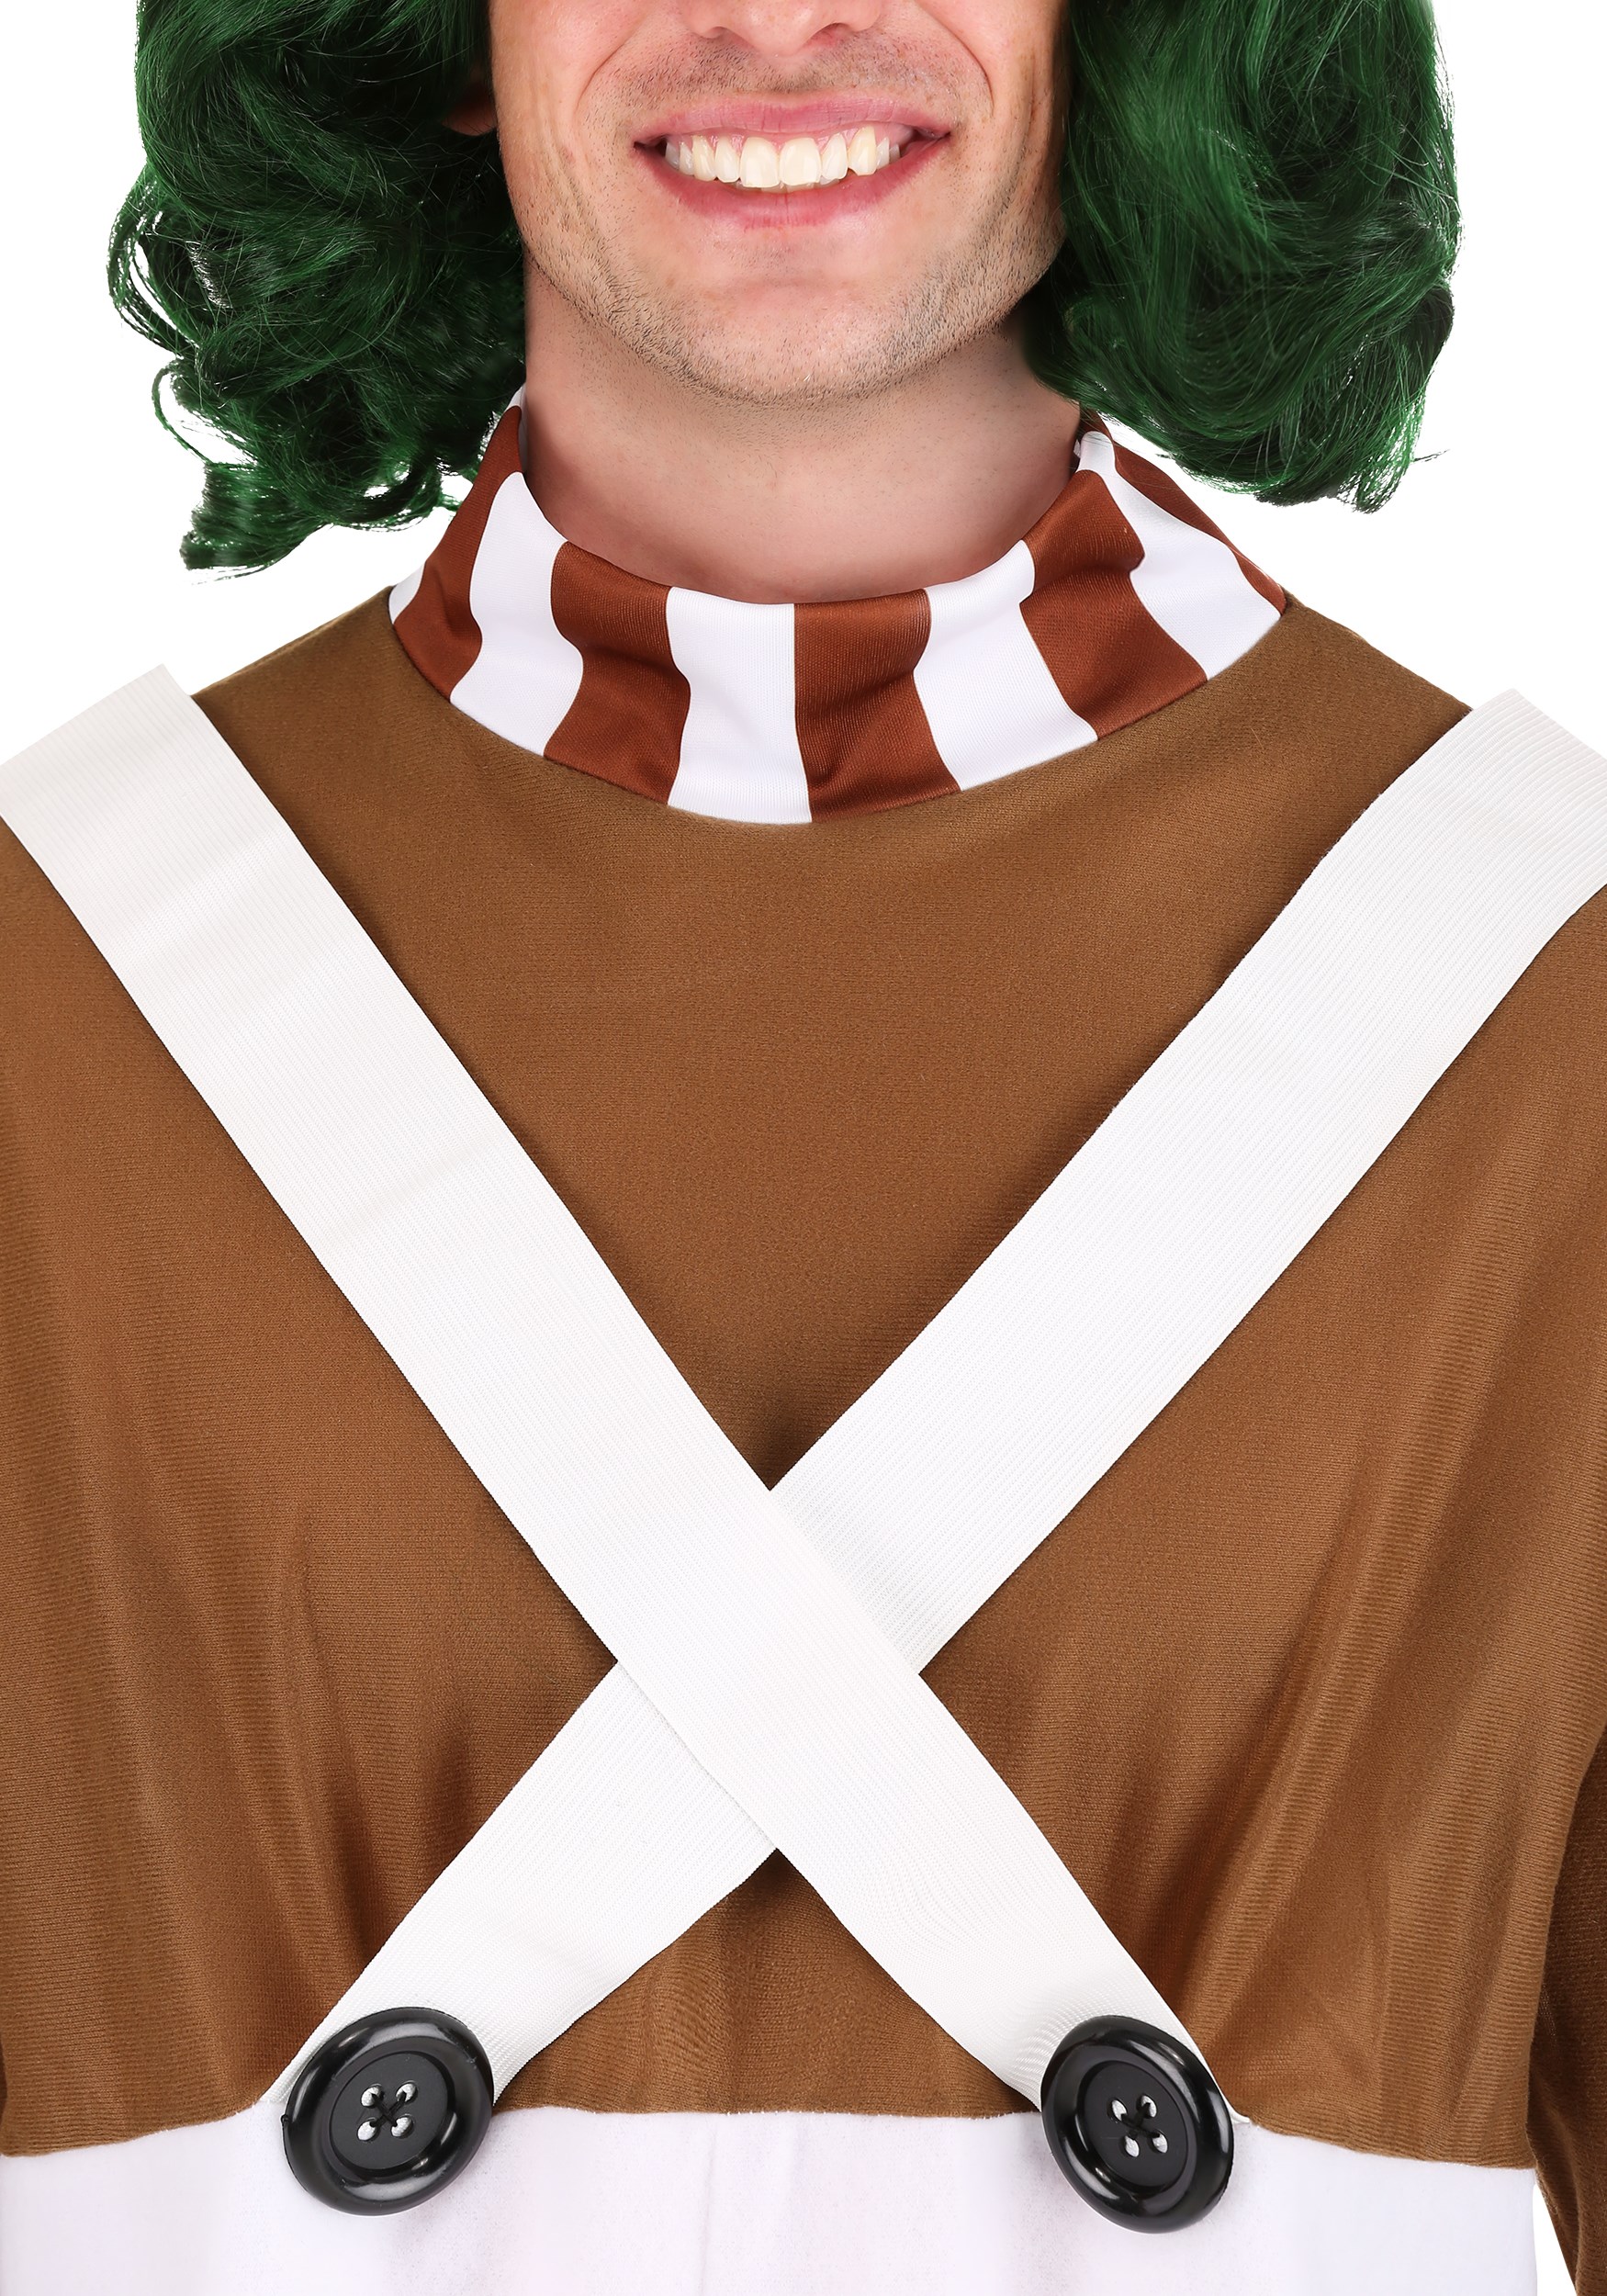 CHILD OOMPA LOOMPA WILLY WONKA COSTUME SIZE L XL Used 